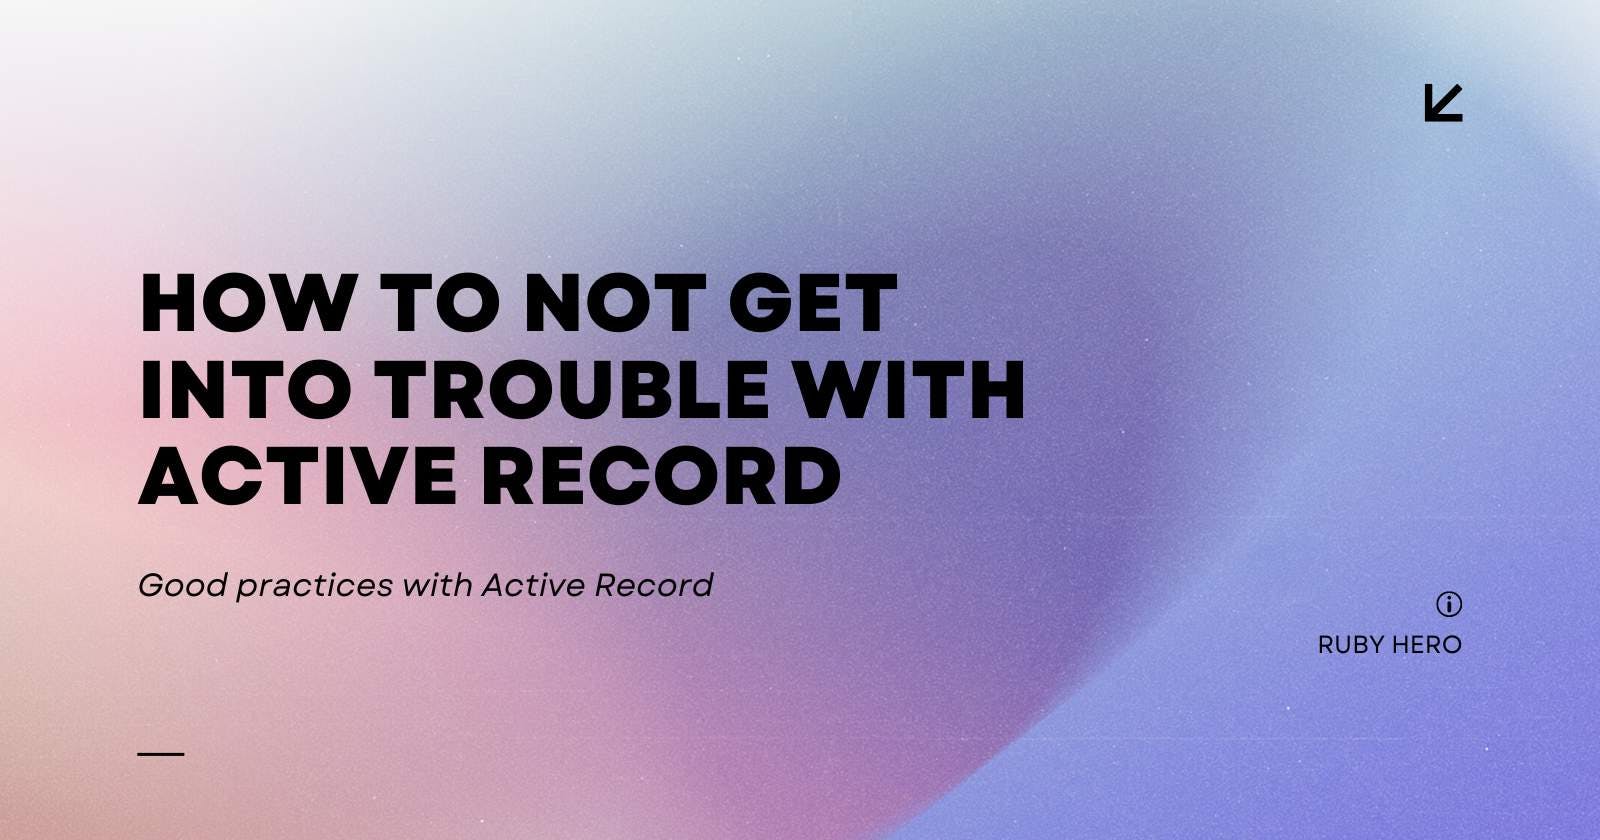 How to not get into trouble with Active Record